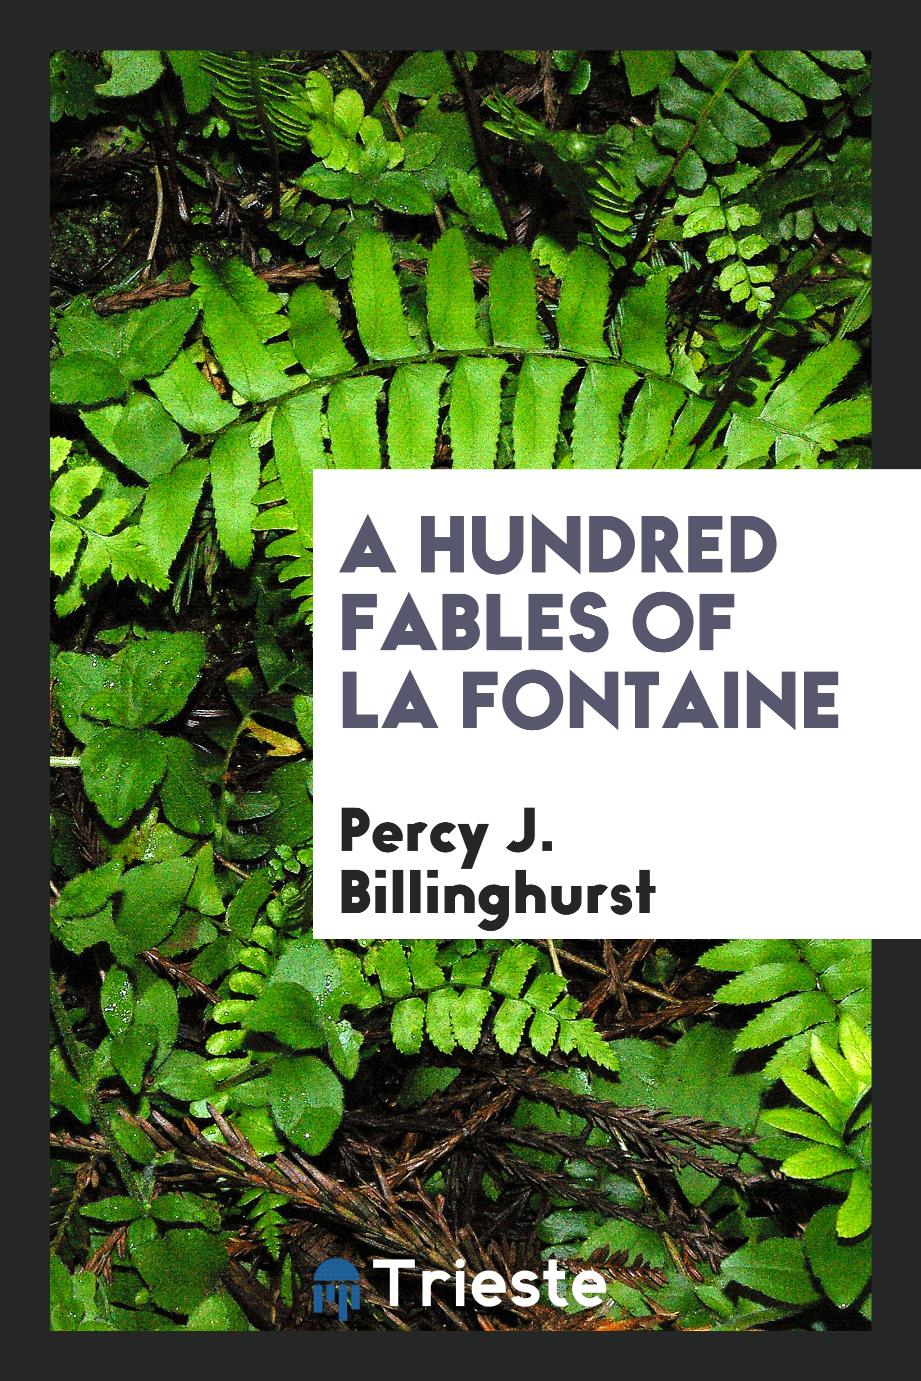 A Hundred fables of La Fontaine